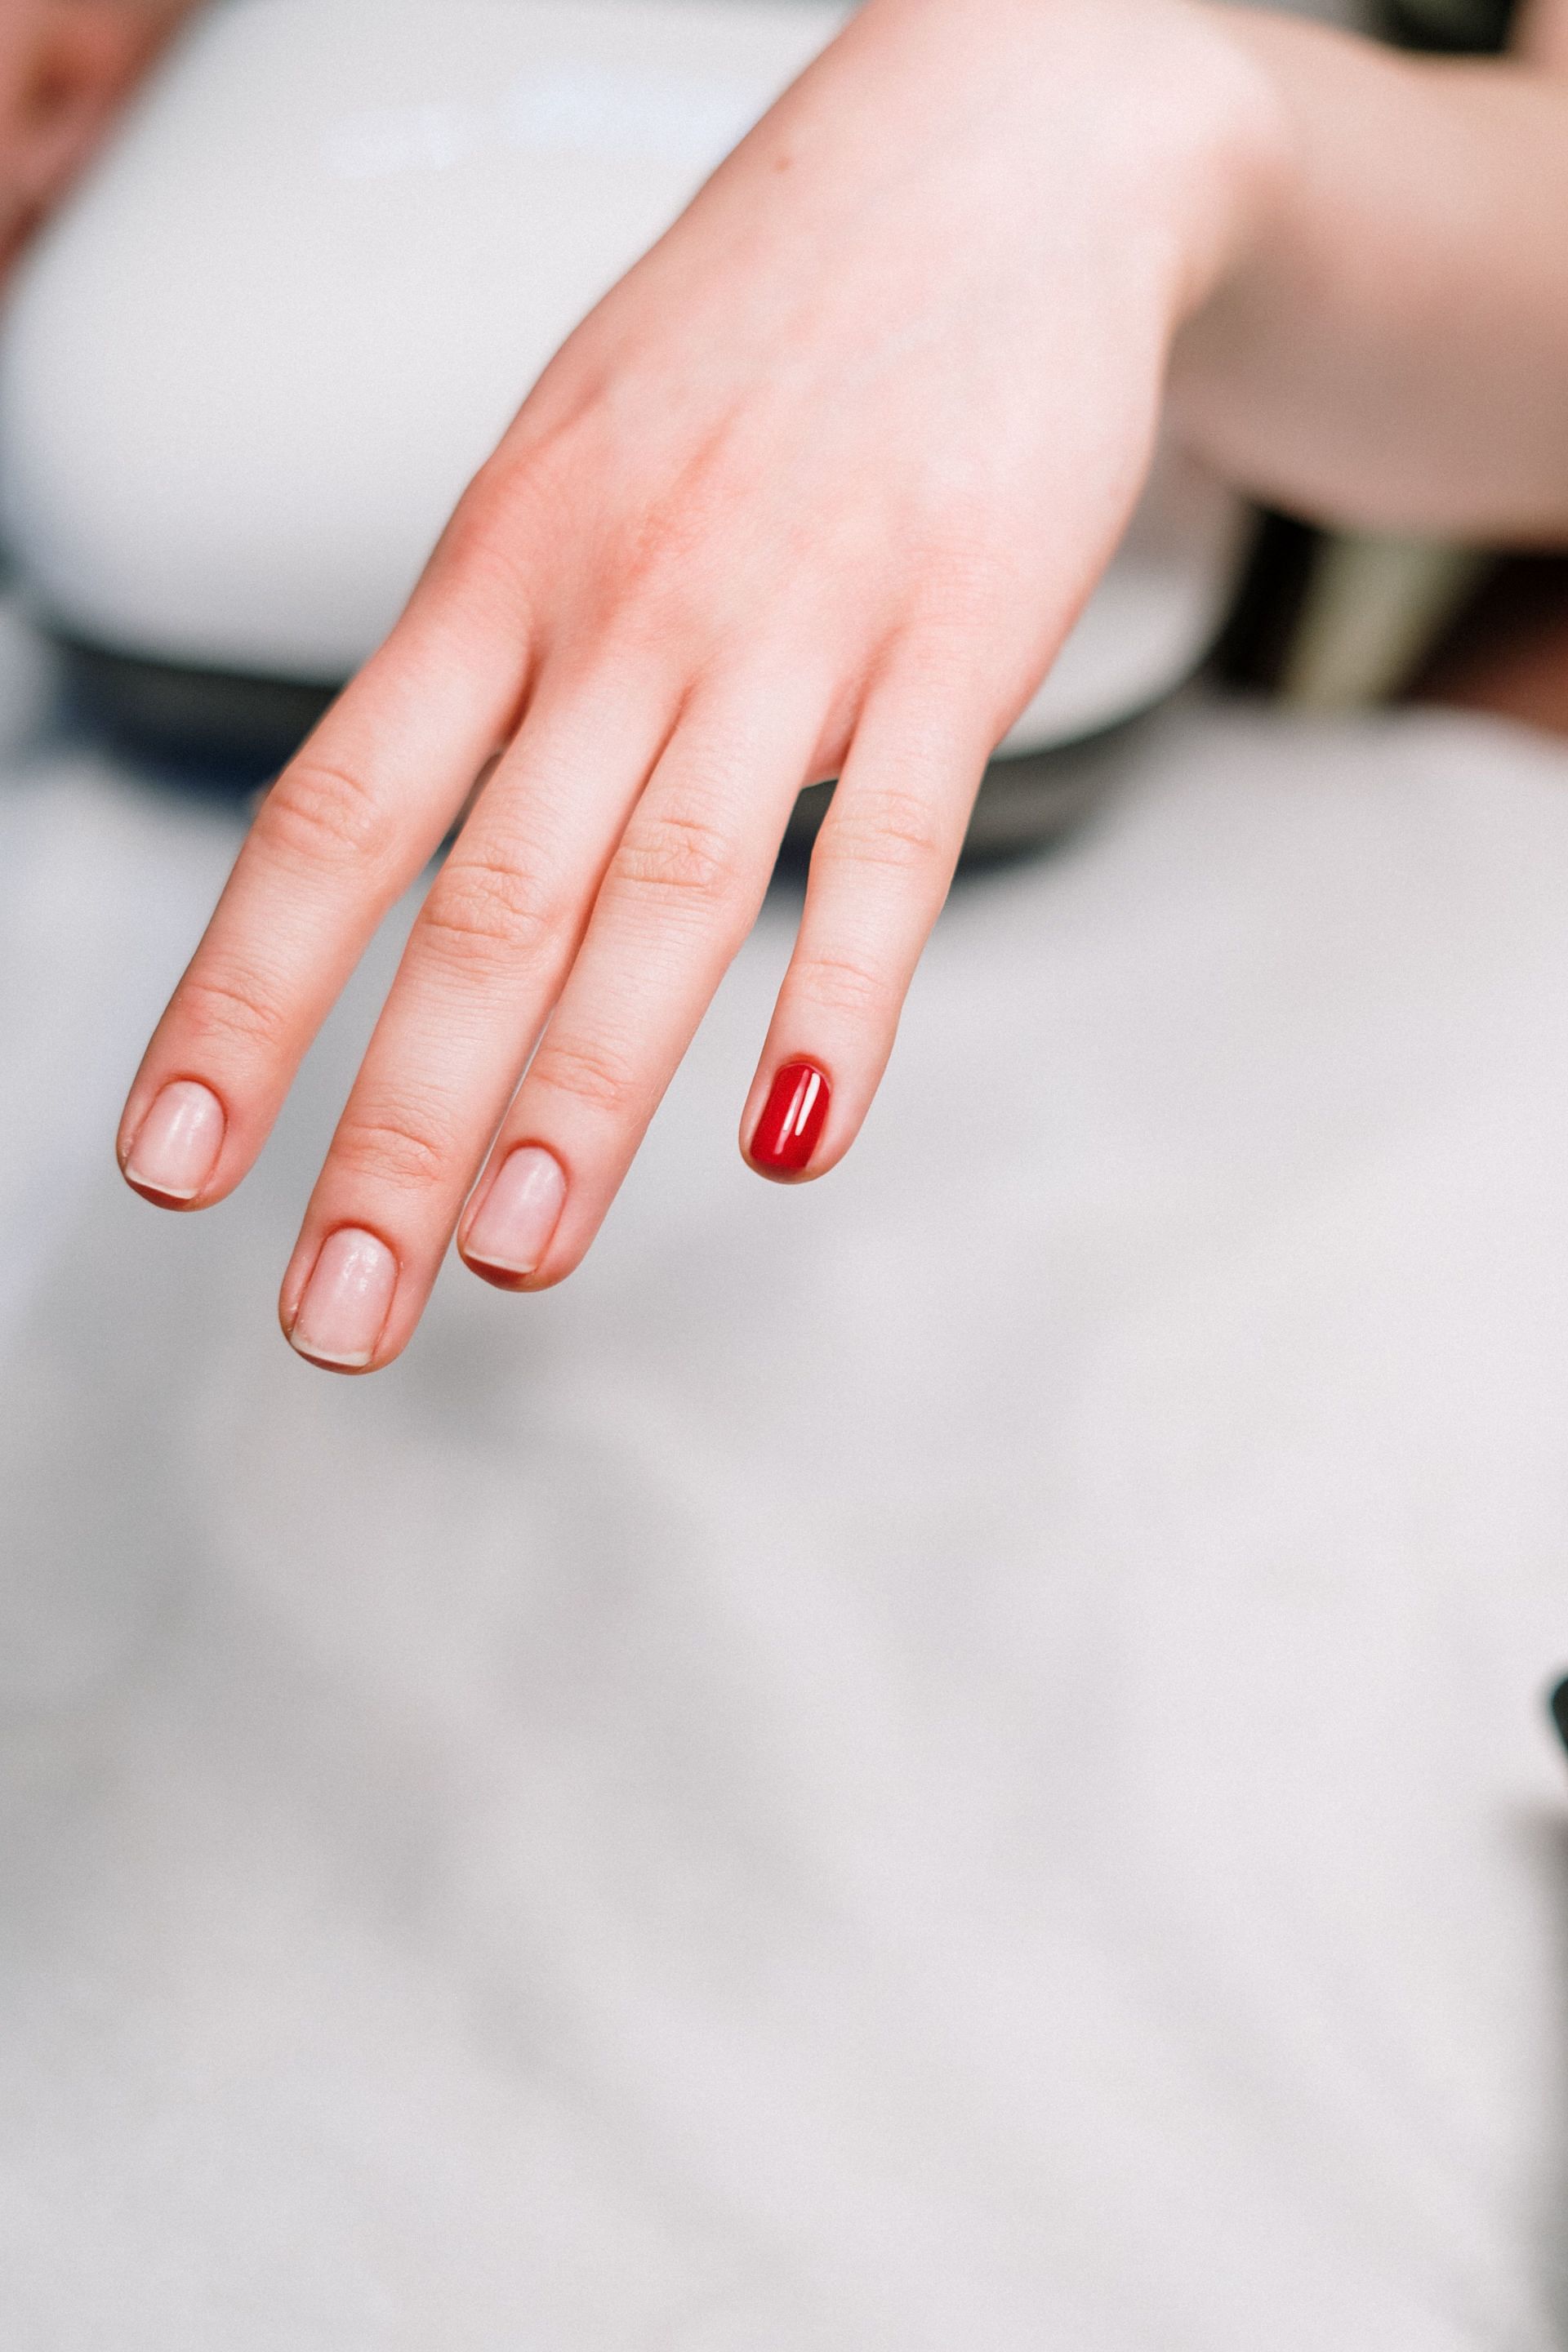 The importance of vitamin B12 for nails (Image via Pexels)